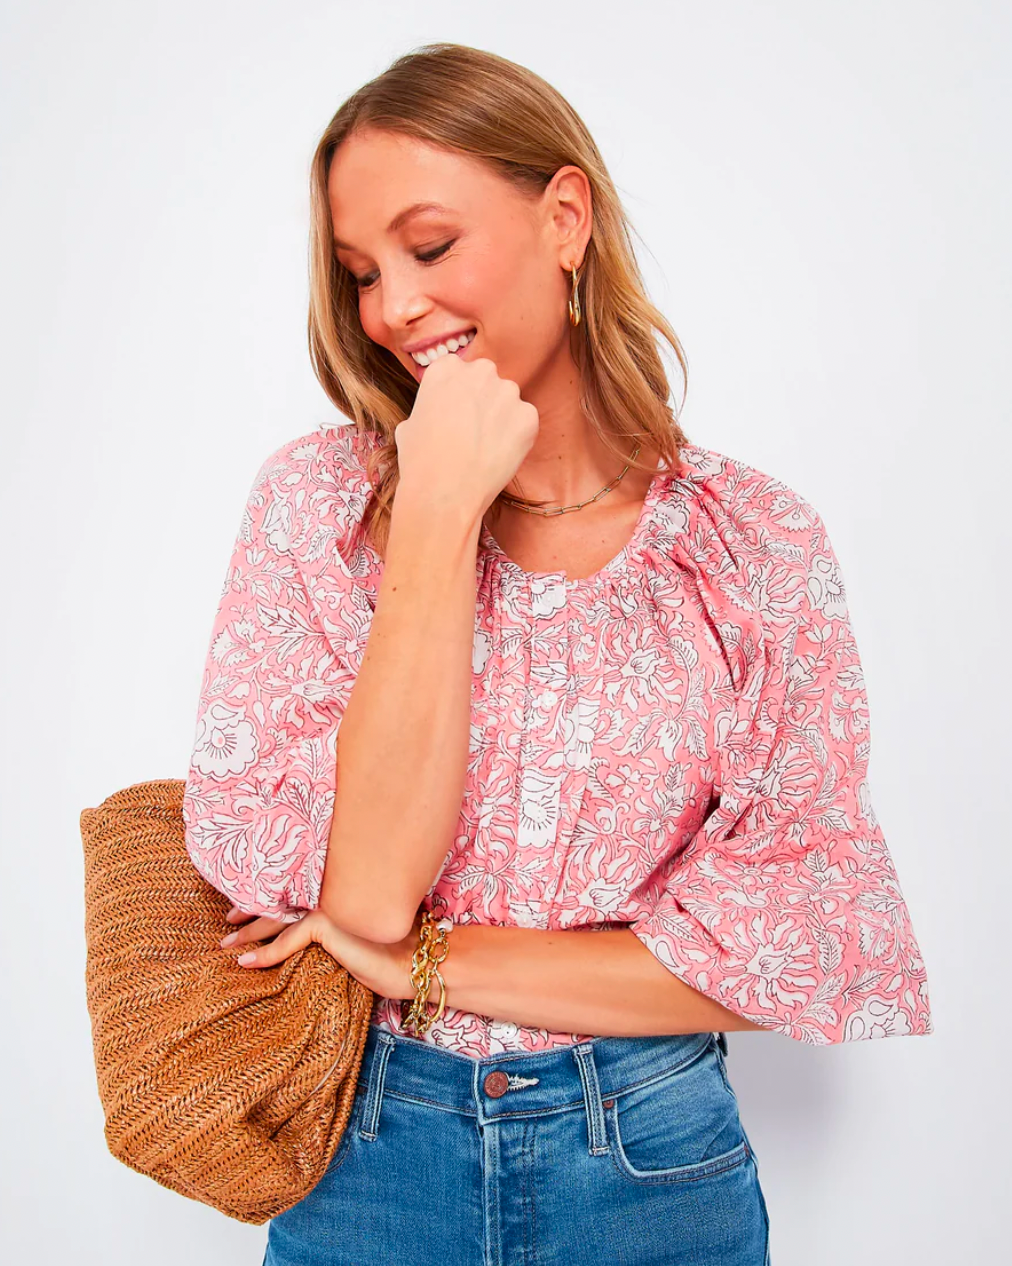 Model wearing Emerson Fry Frances Blouse in Devins flowers pink organic wearing jeans holding a brown clutch on a white background